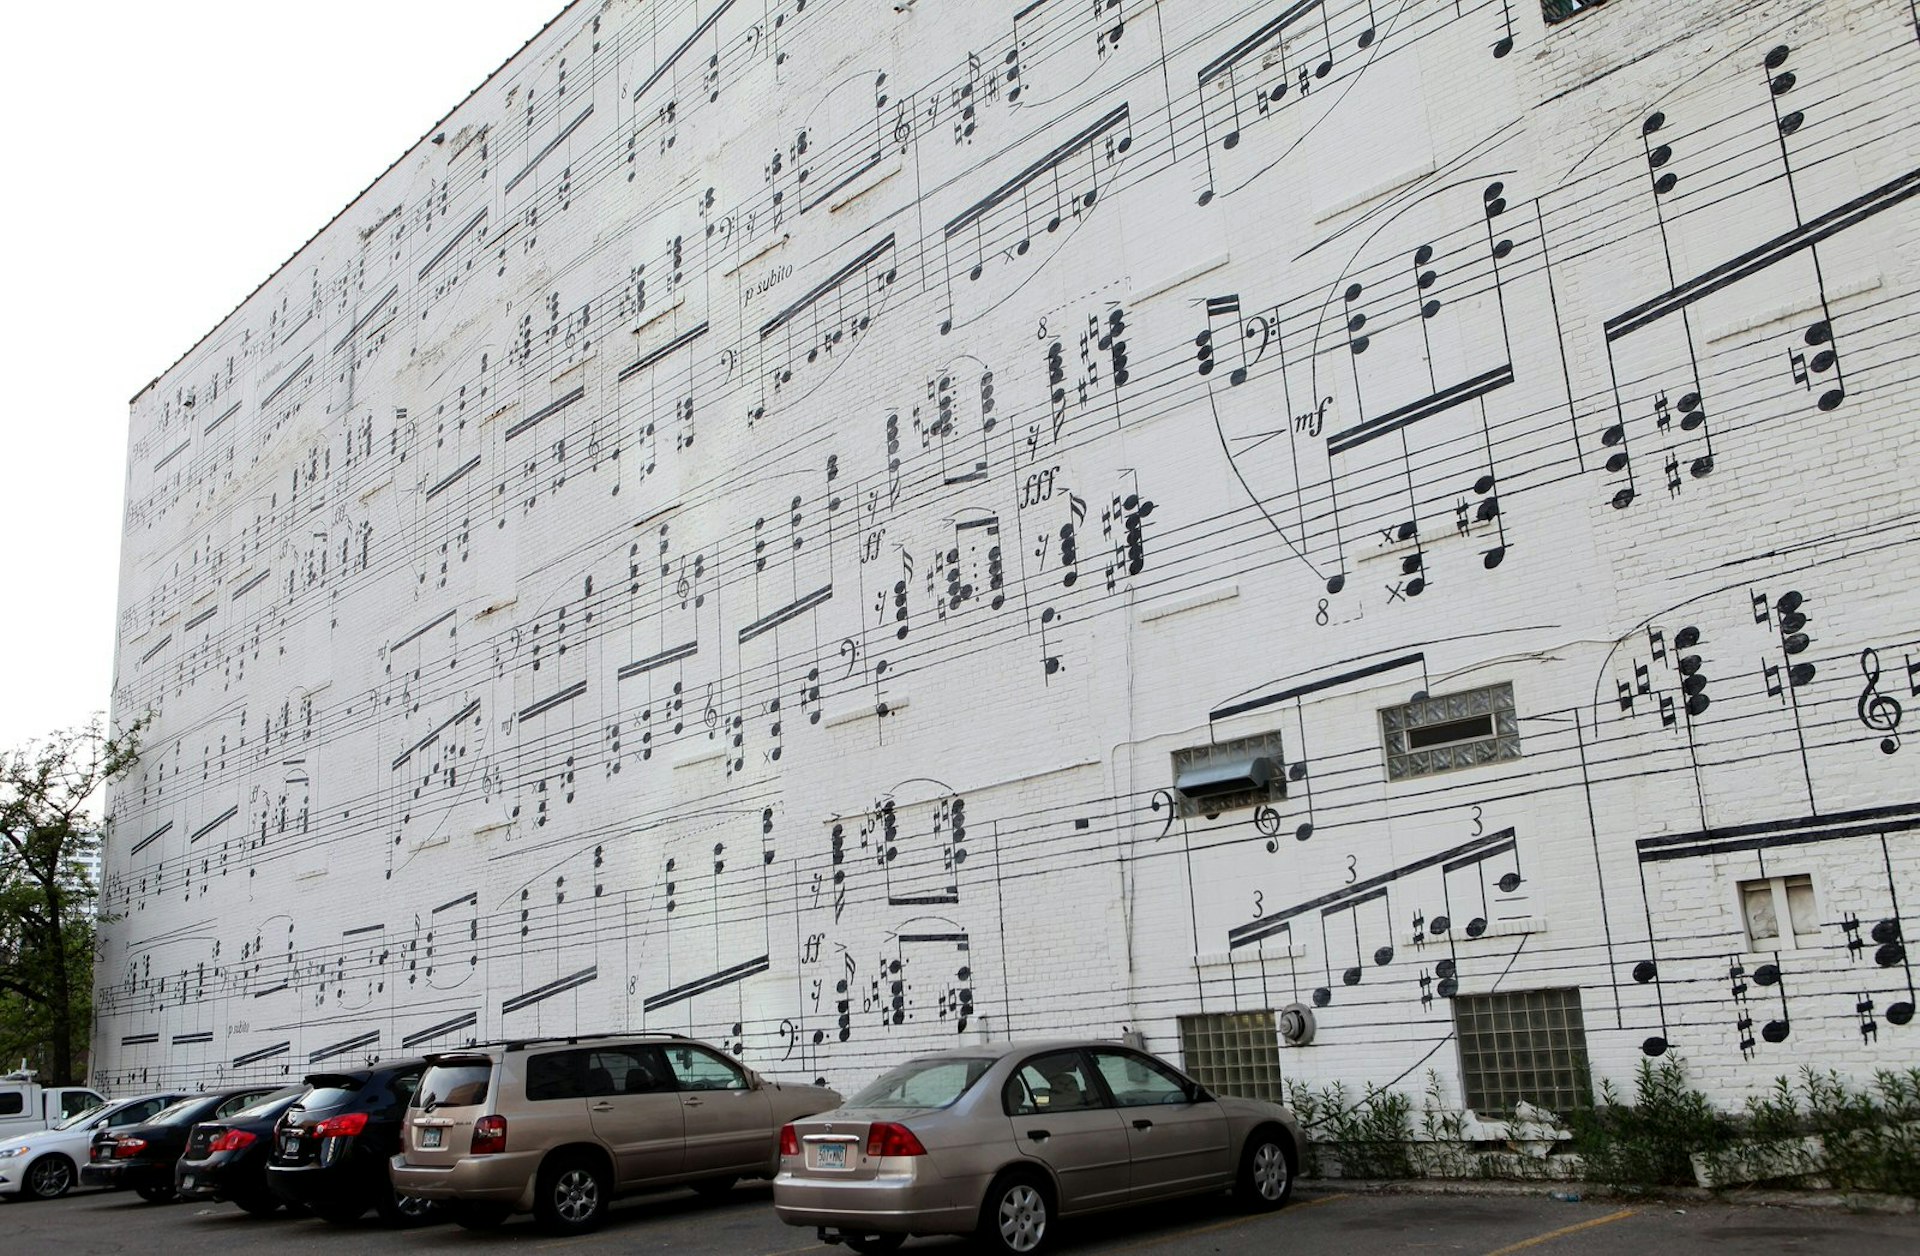 A musical mural on the side of the Schmitt Music Building: the artwork resembles a giant sheet of music, with black music notes painted onto a white background